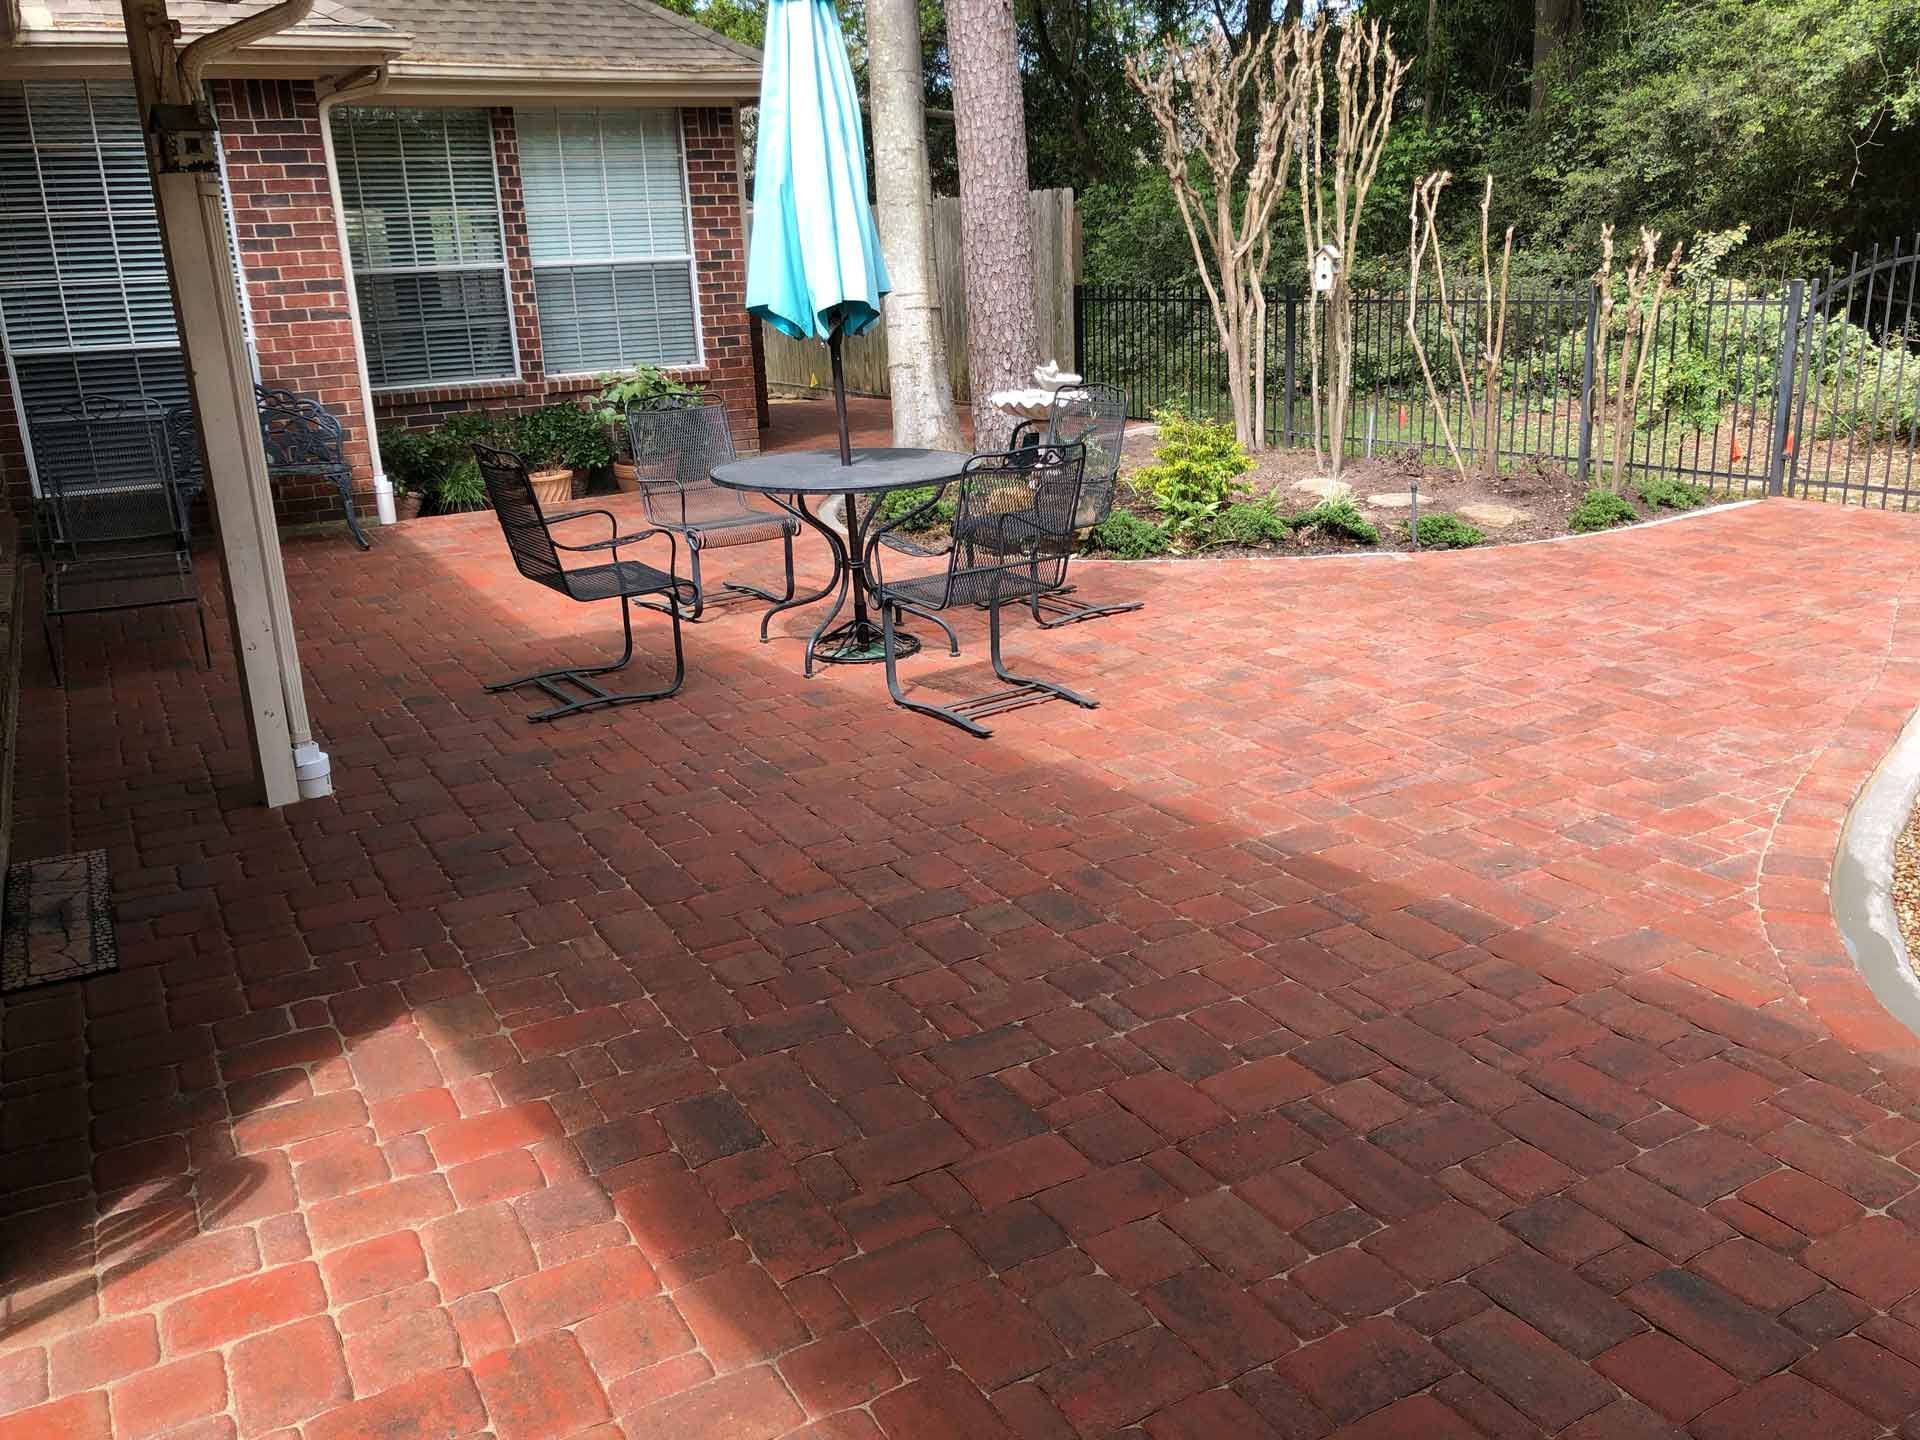 Paver patio in house backyard